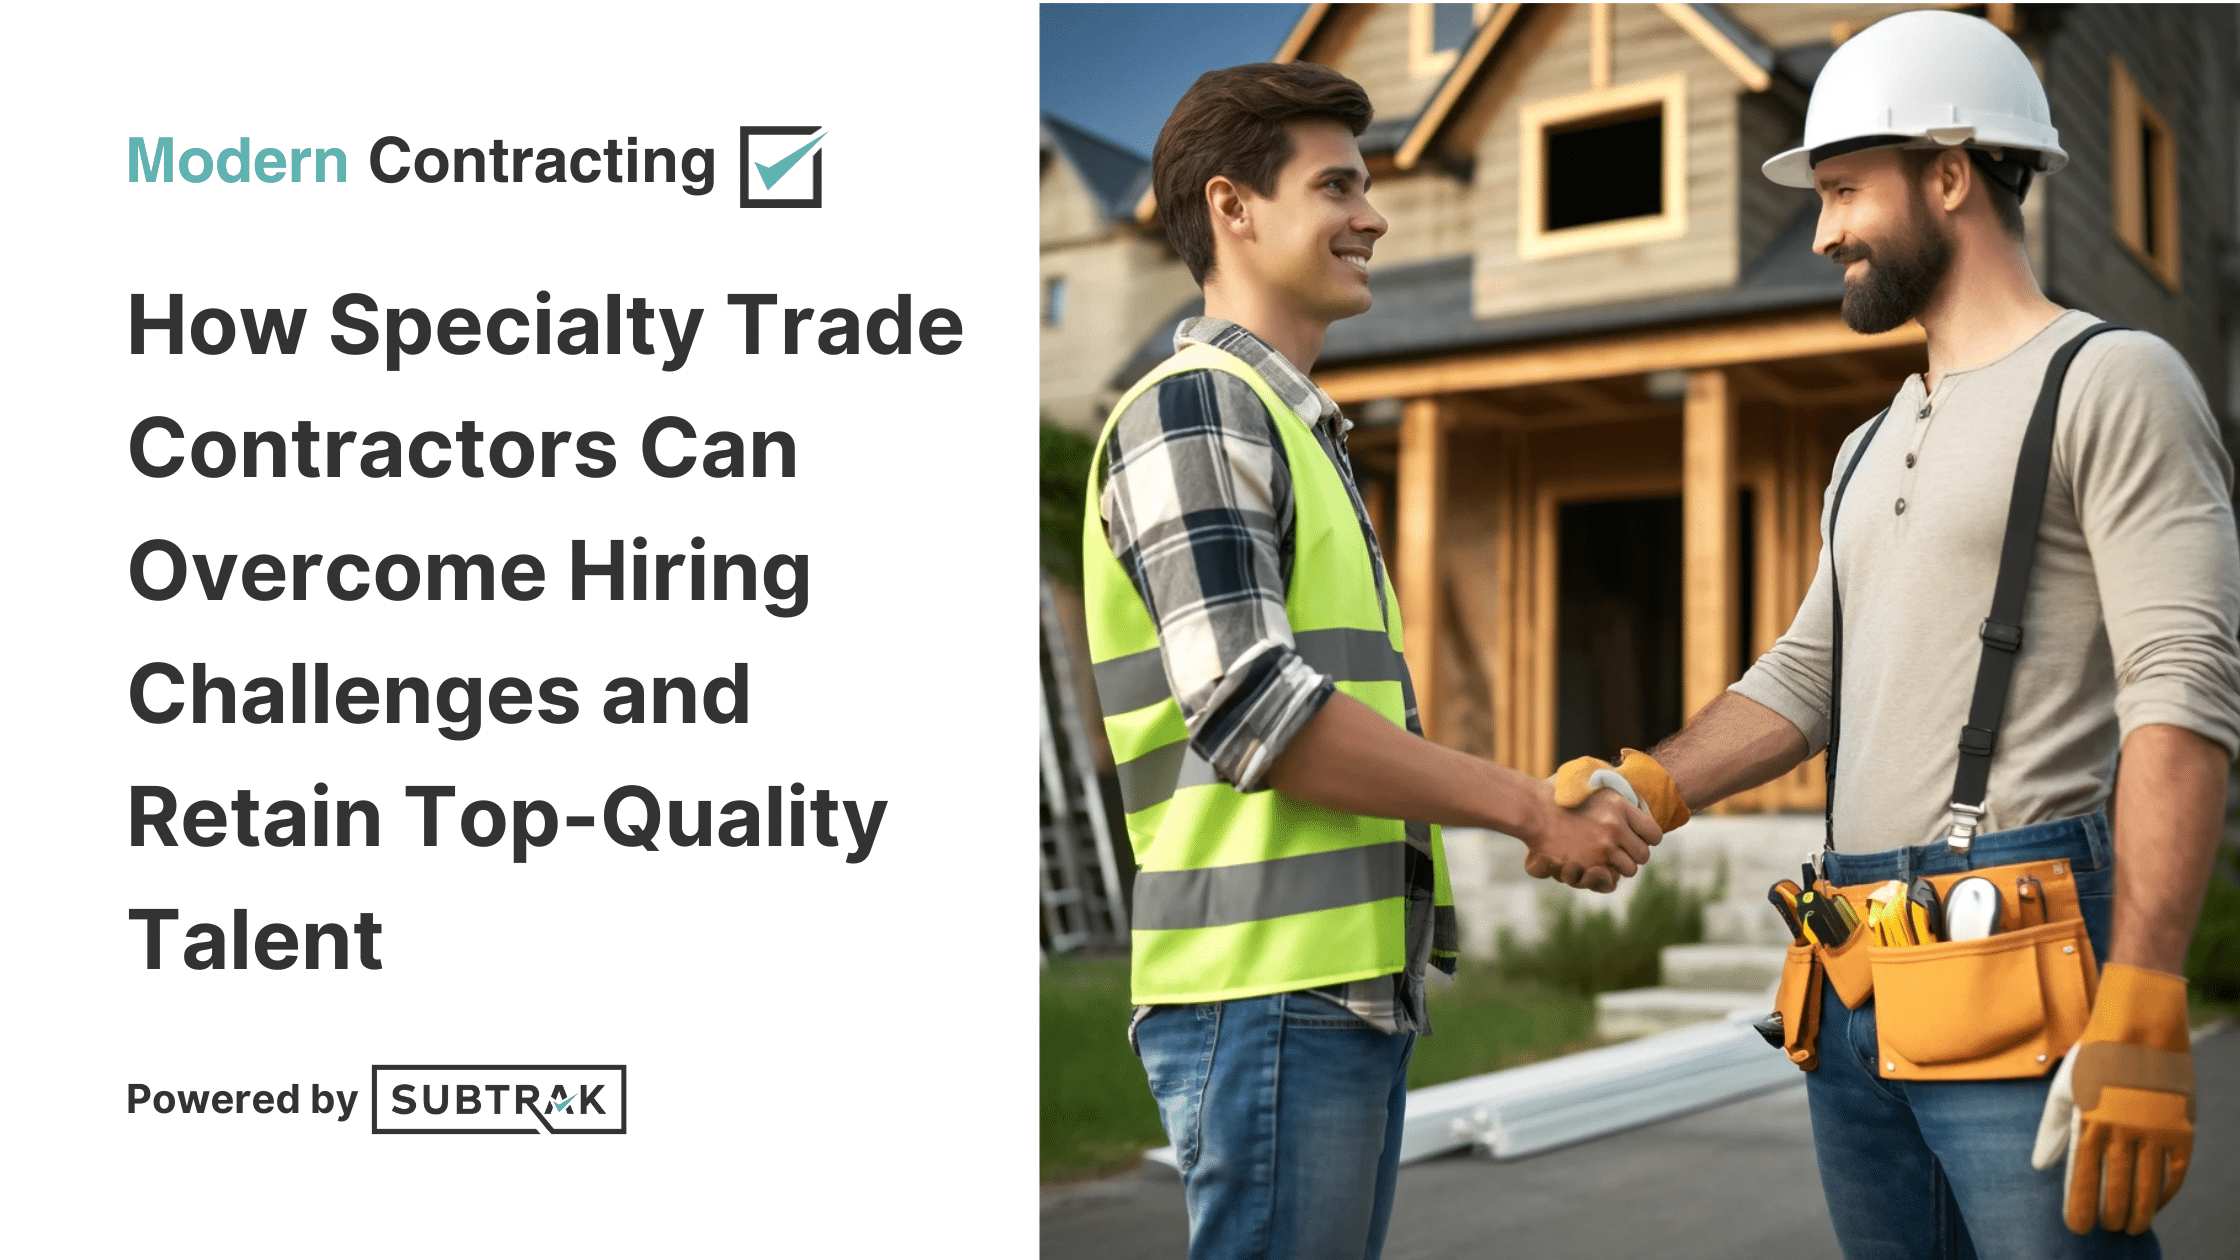 How Specialty Trade Contractors Can Overcome Hiring Challenges and Retain Top-Quality Talent